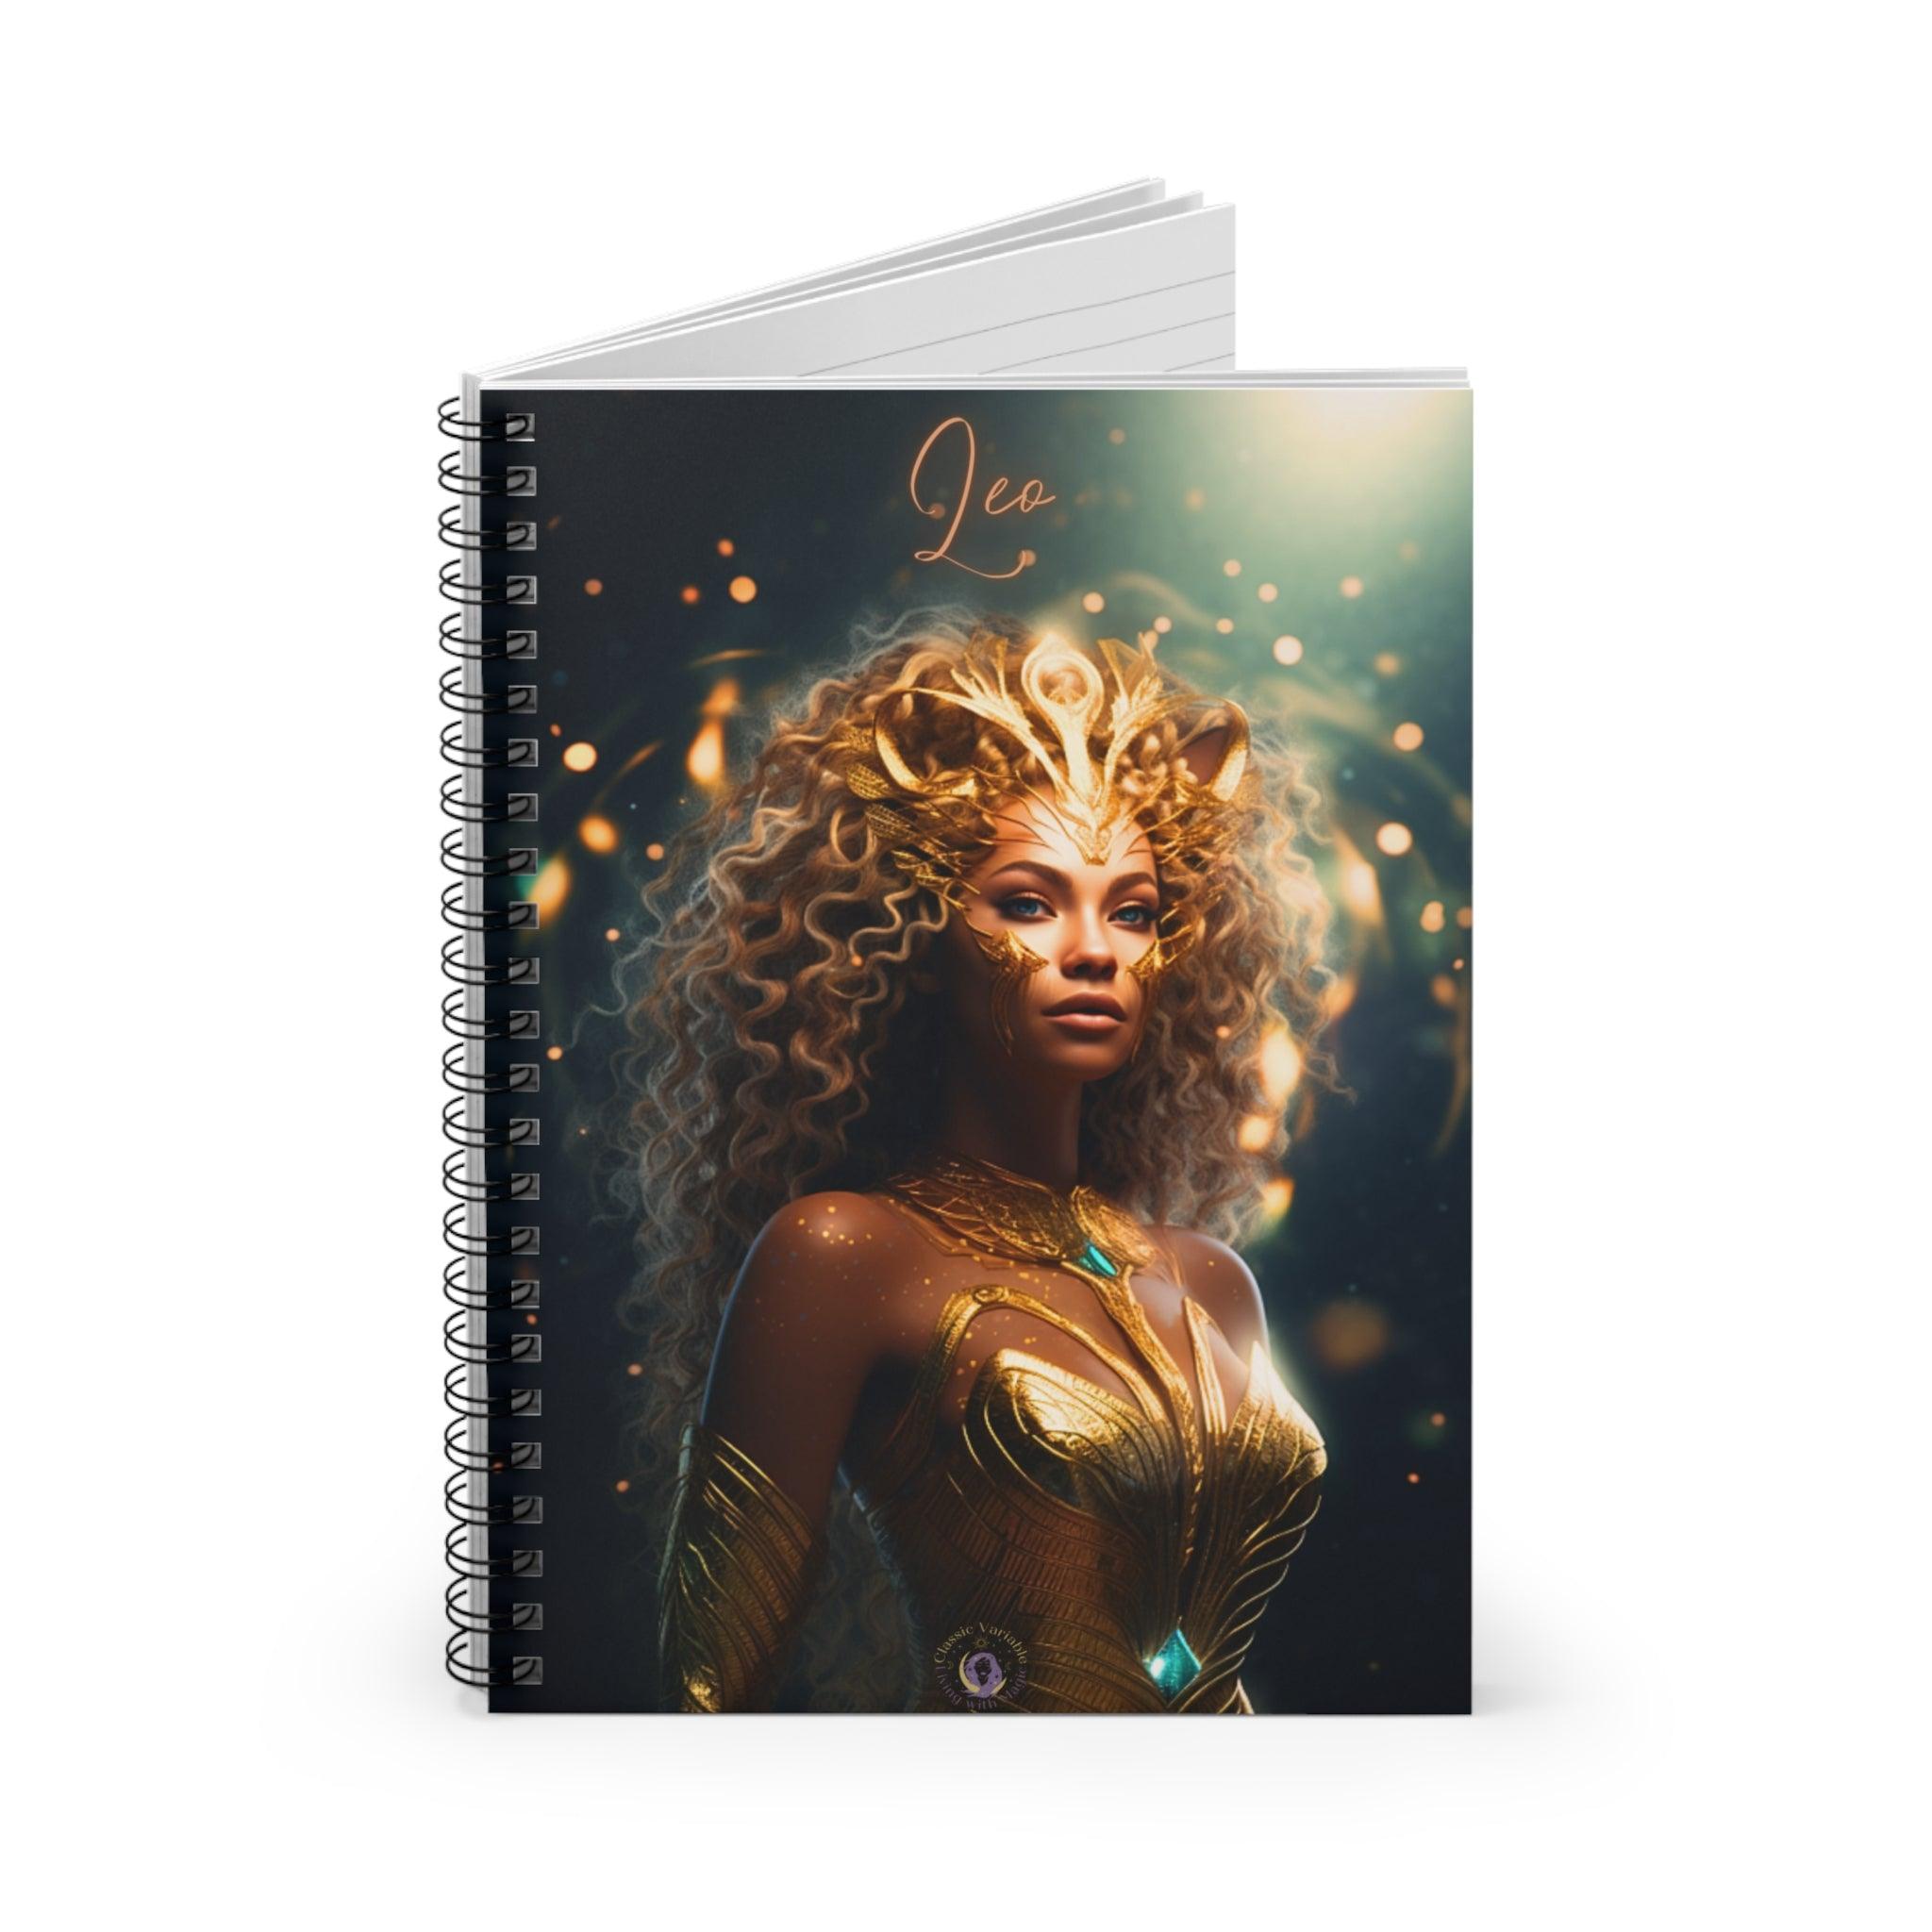 Leo Spiral Notebook - Ruled Line - Classic Variable